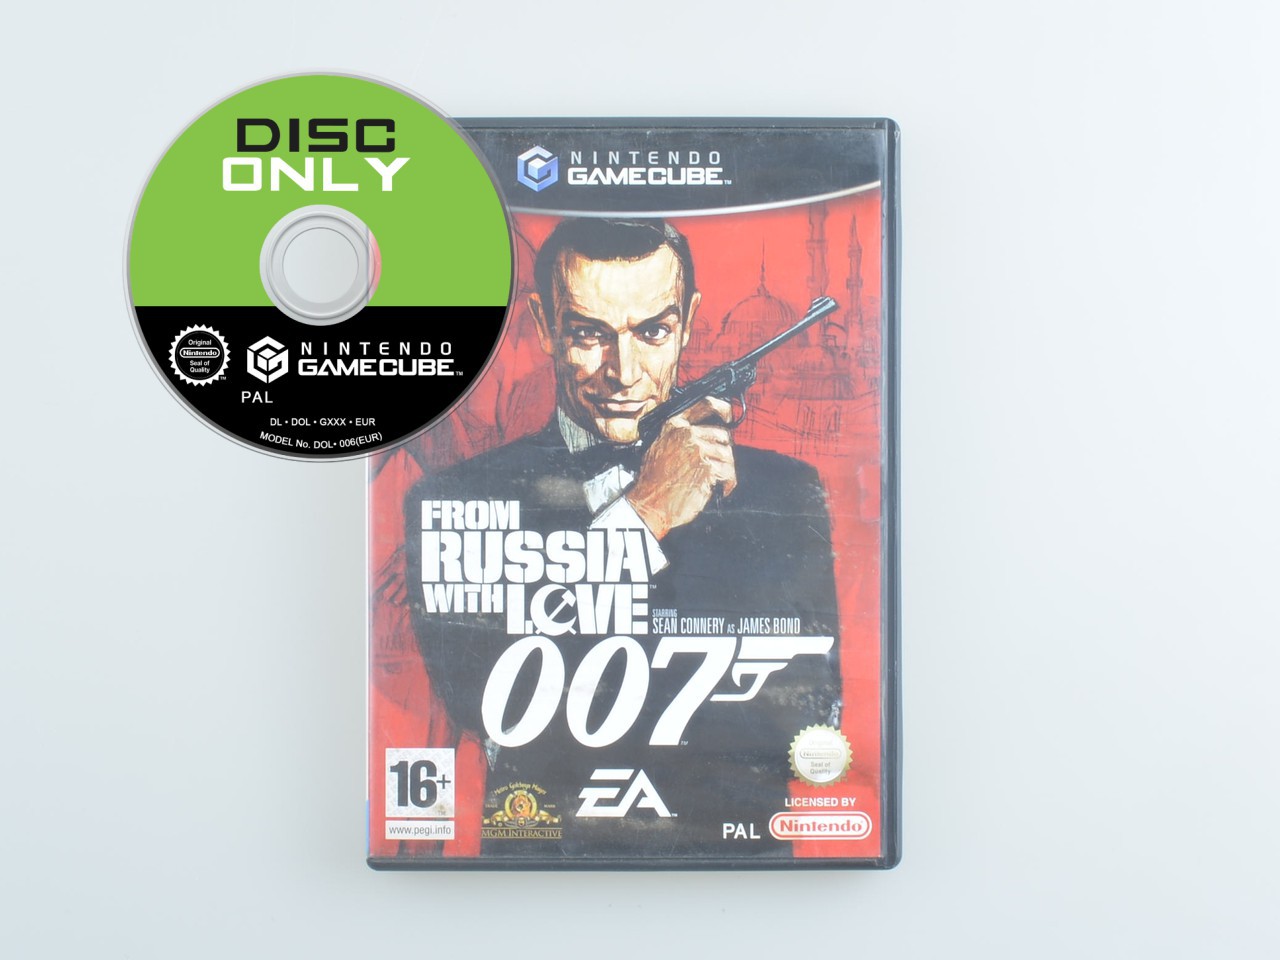 From Russia with Love - Disc Only Kopen | Gamecube Games